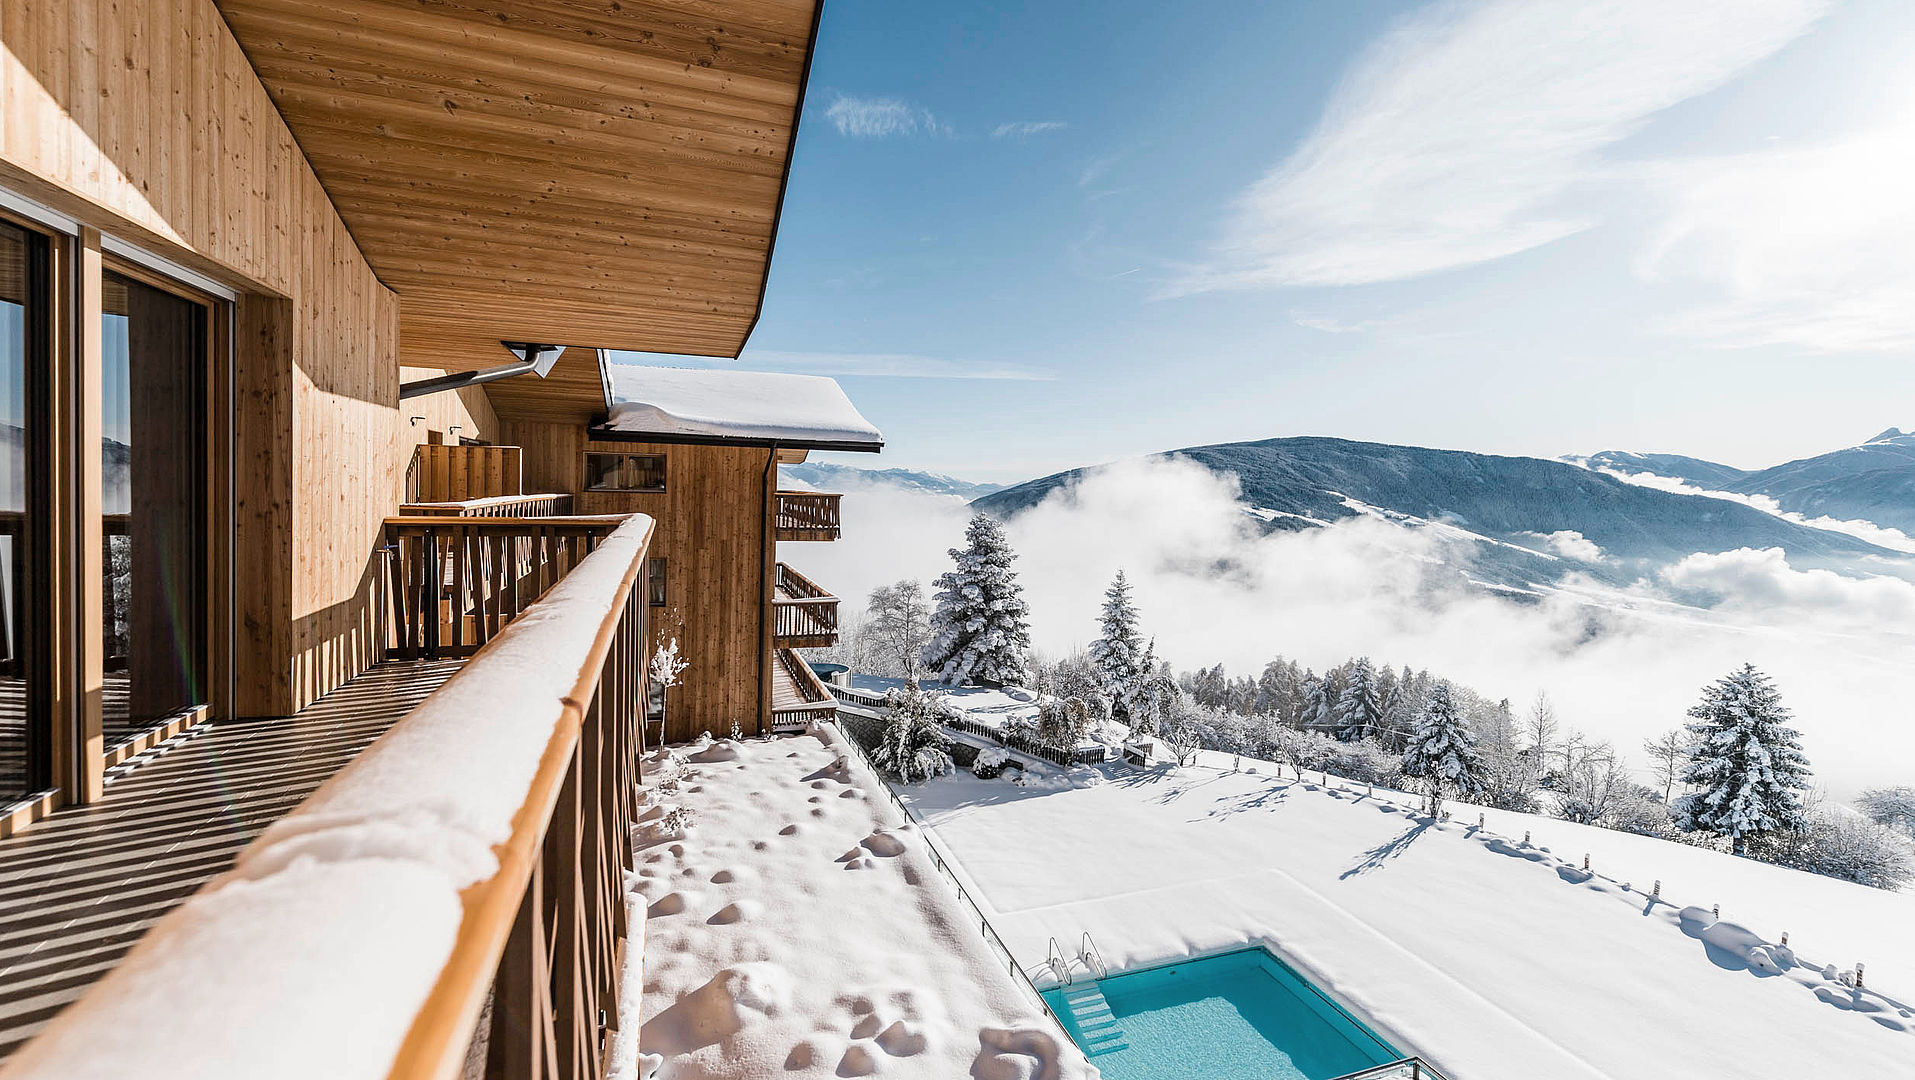 Balcony and swimming pool in the snow